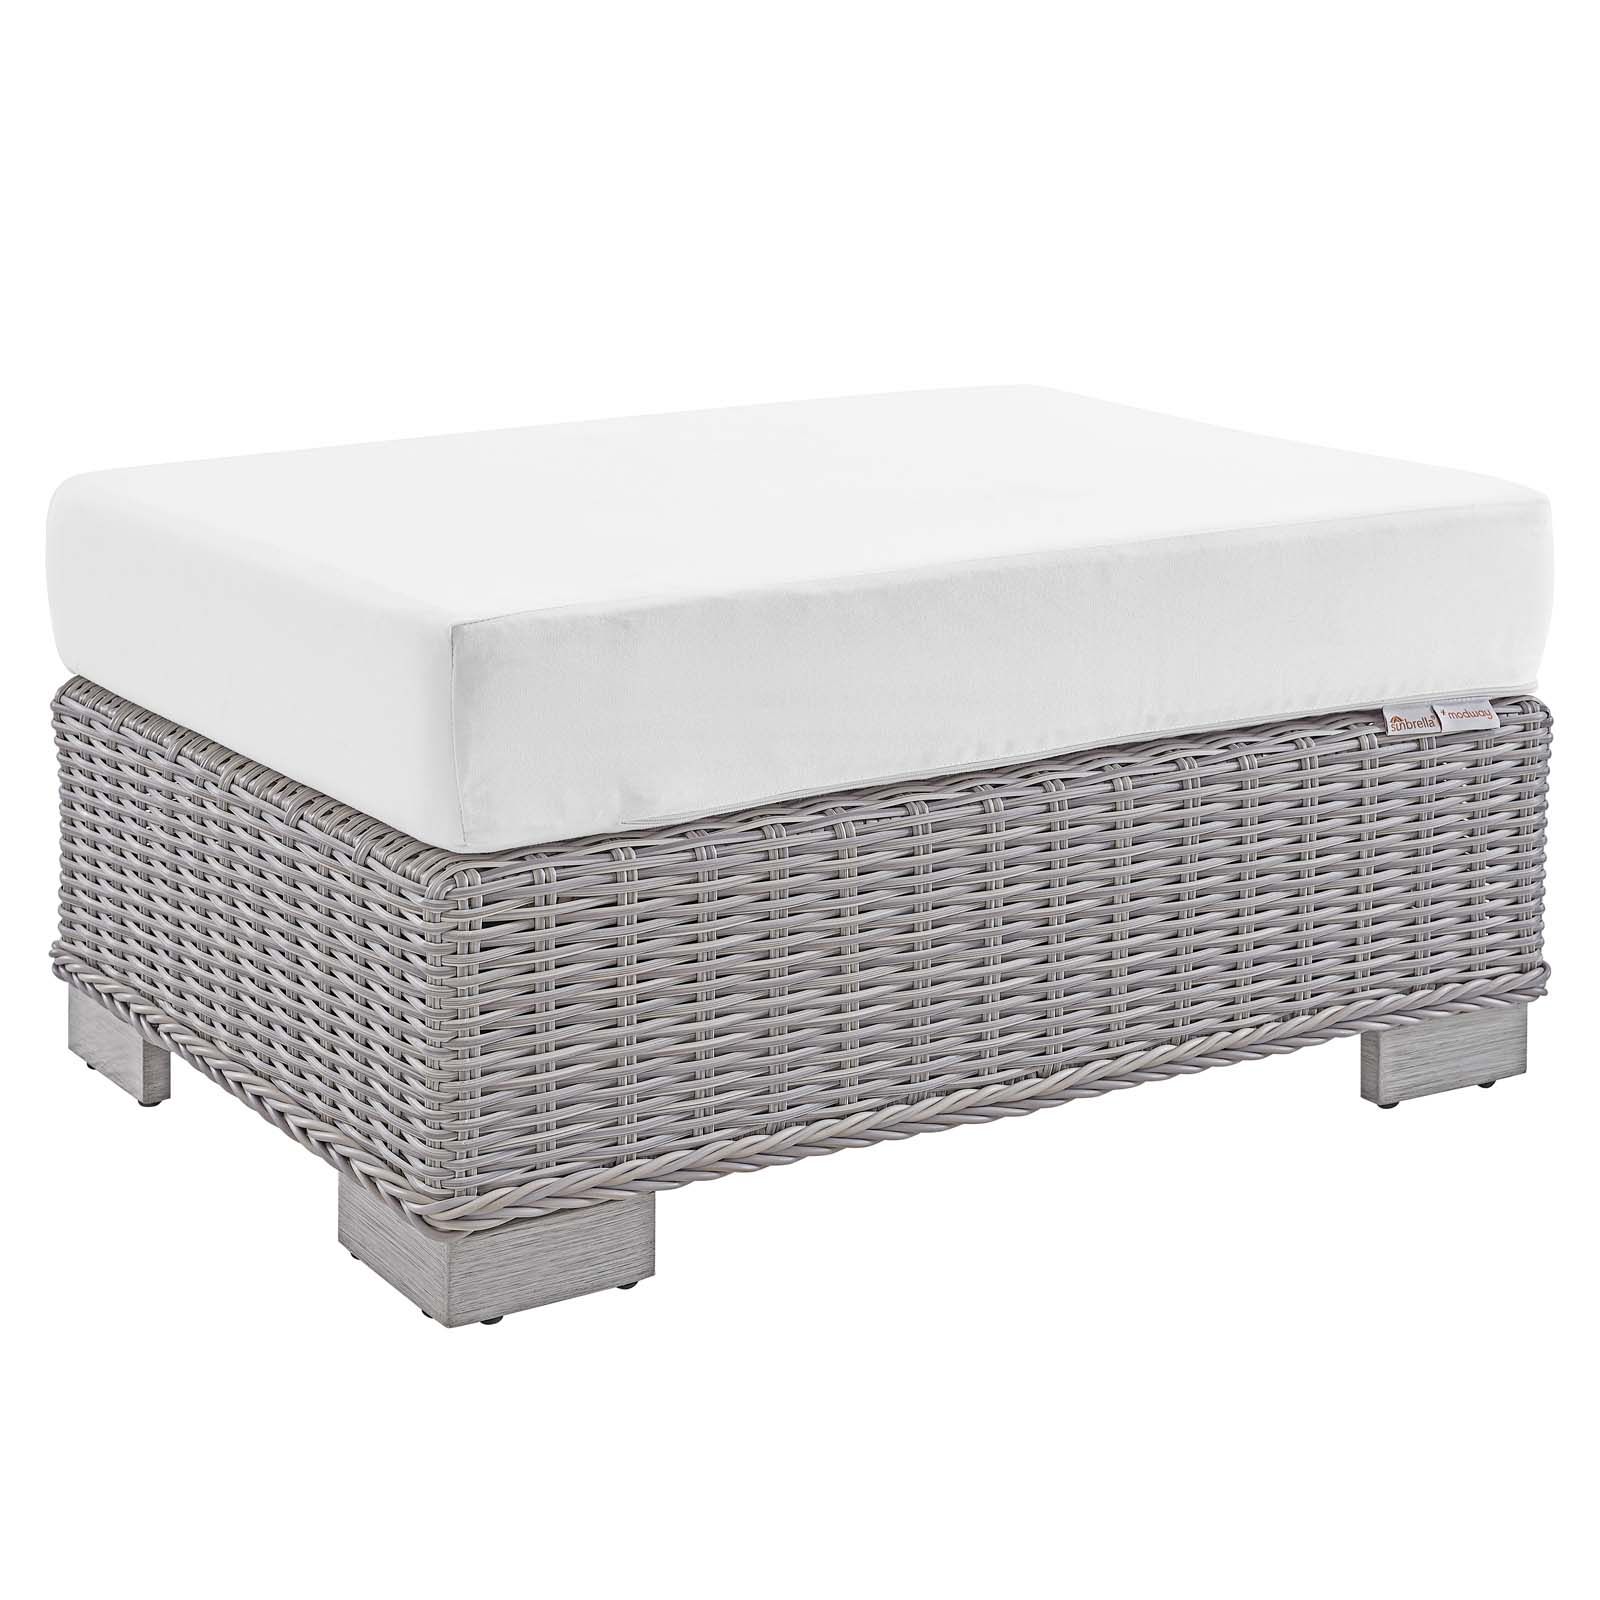 Conway Outdoor Patio Wicker Rattan Ottoman In Light Gray White Pertaining To White And Light Gray Cylinder Pouf Ottomans (View 17 of 20)